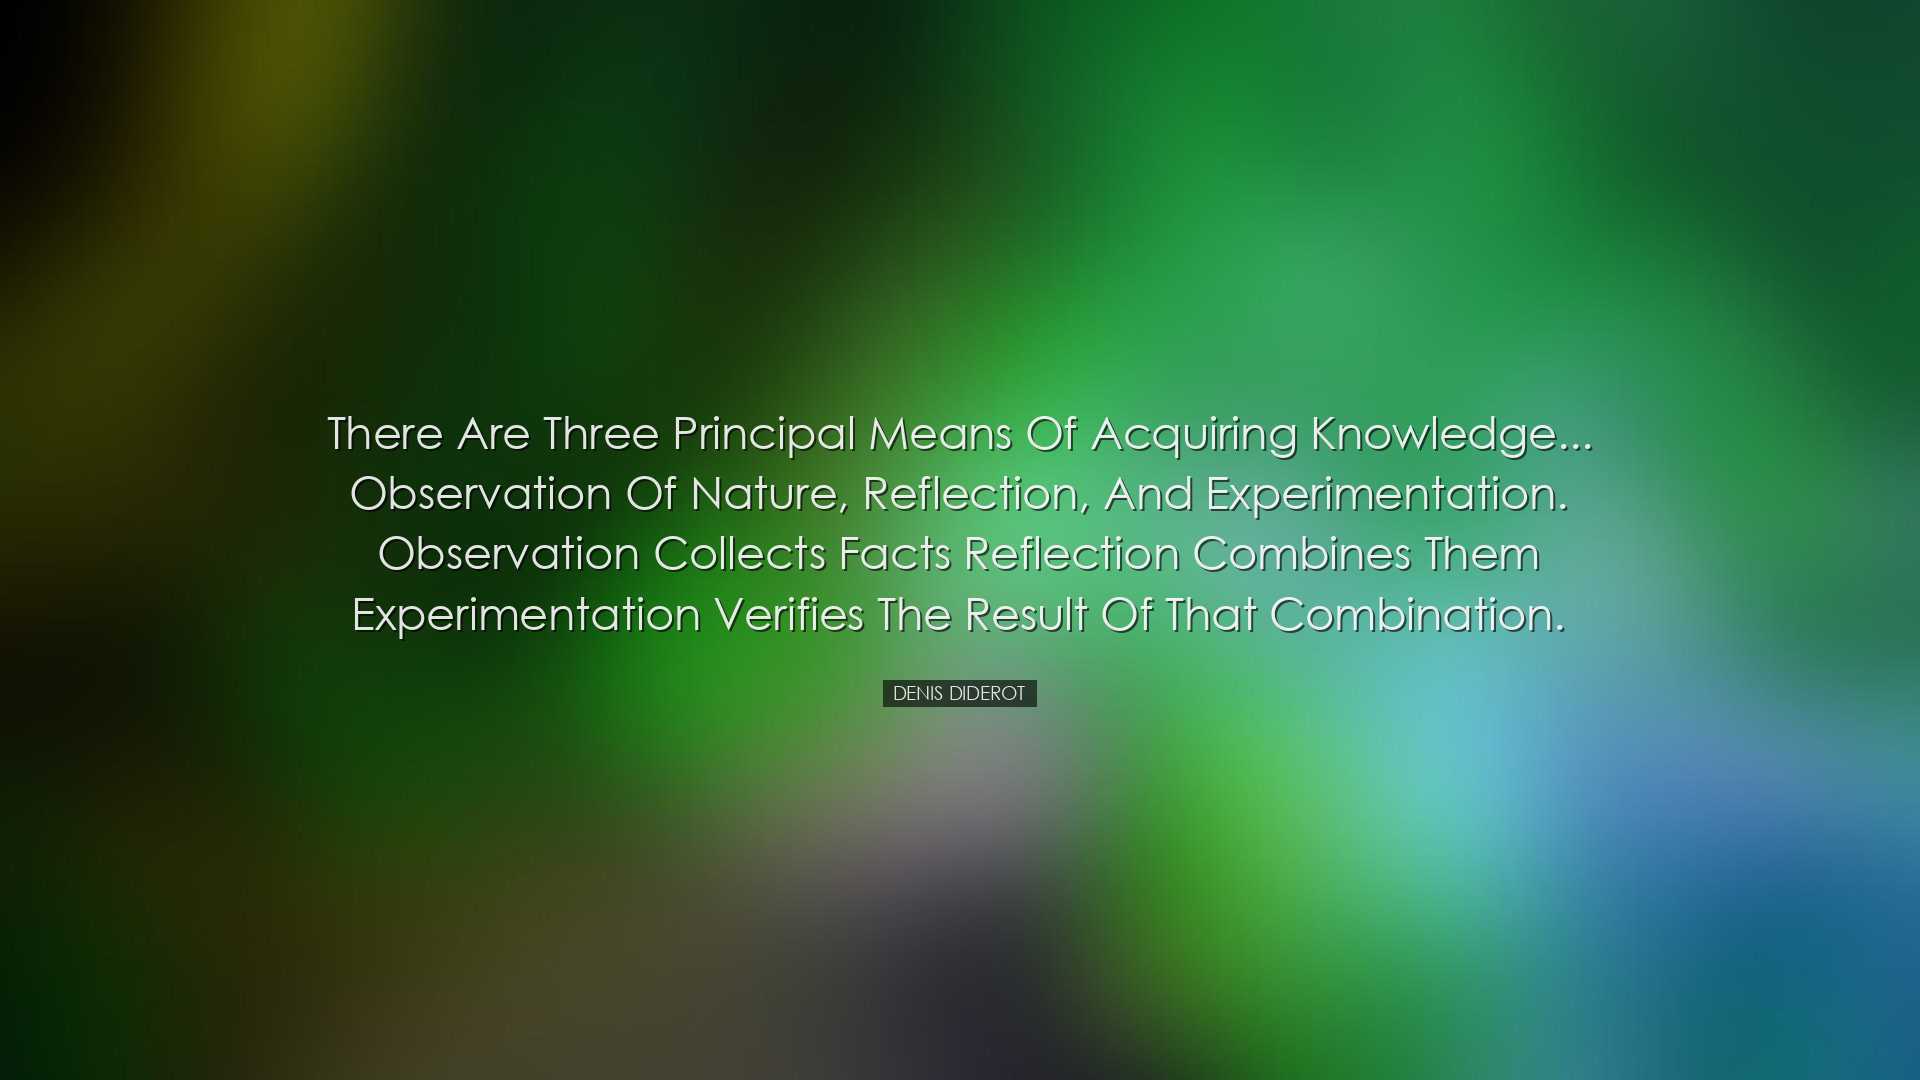 There are three principal means of acquiring knowledge... observat